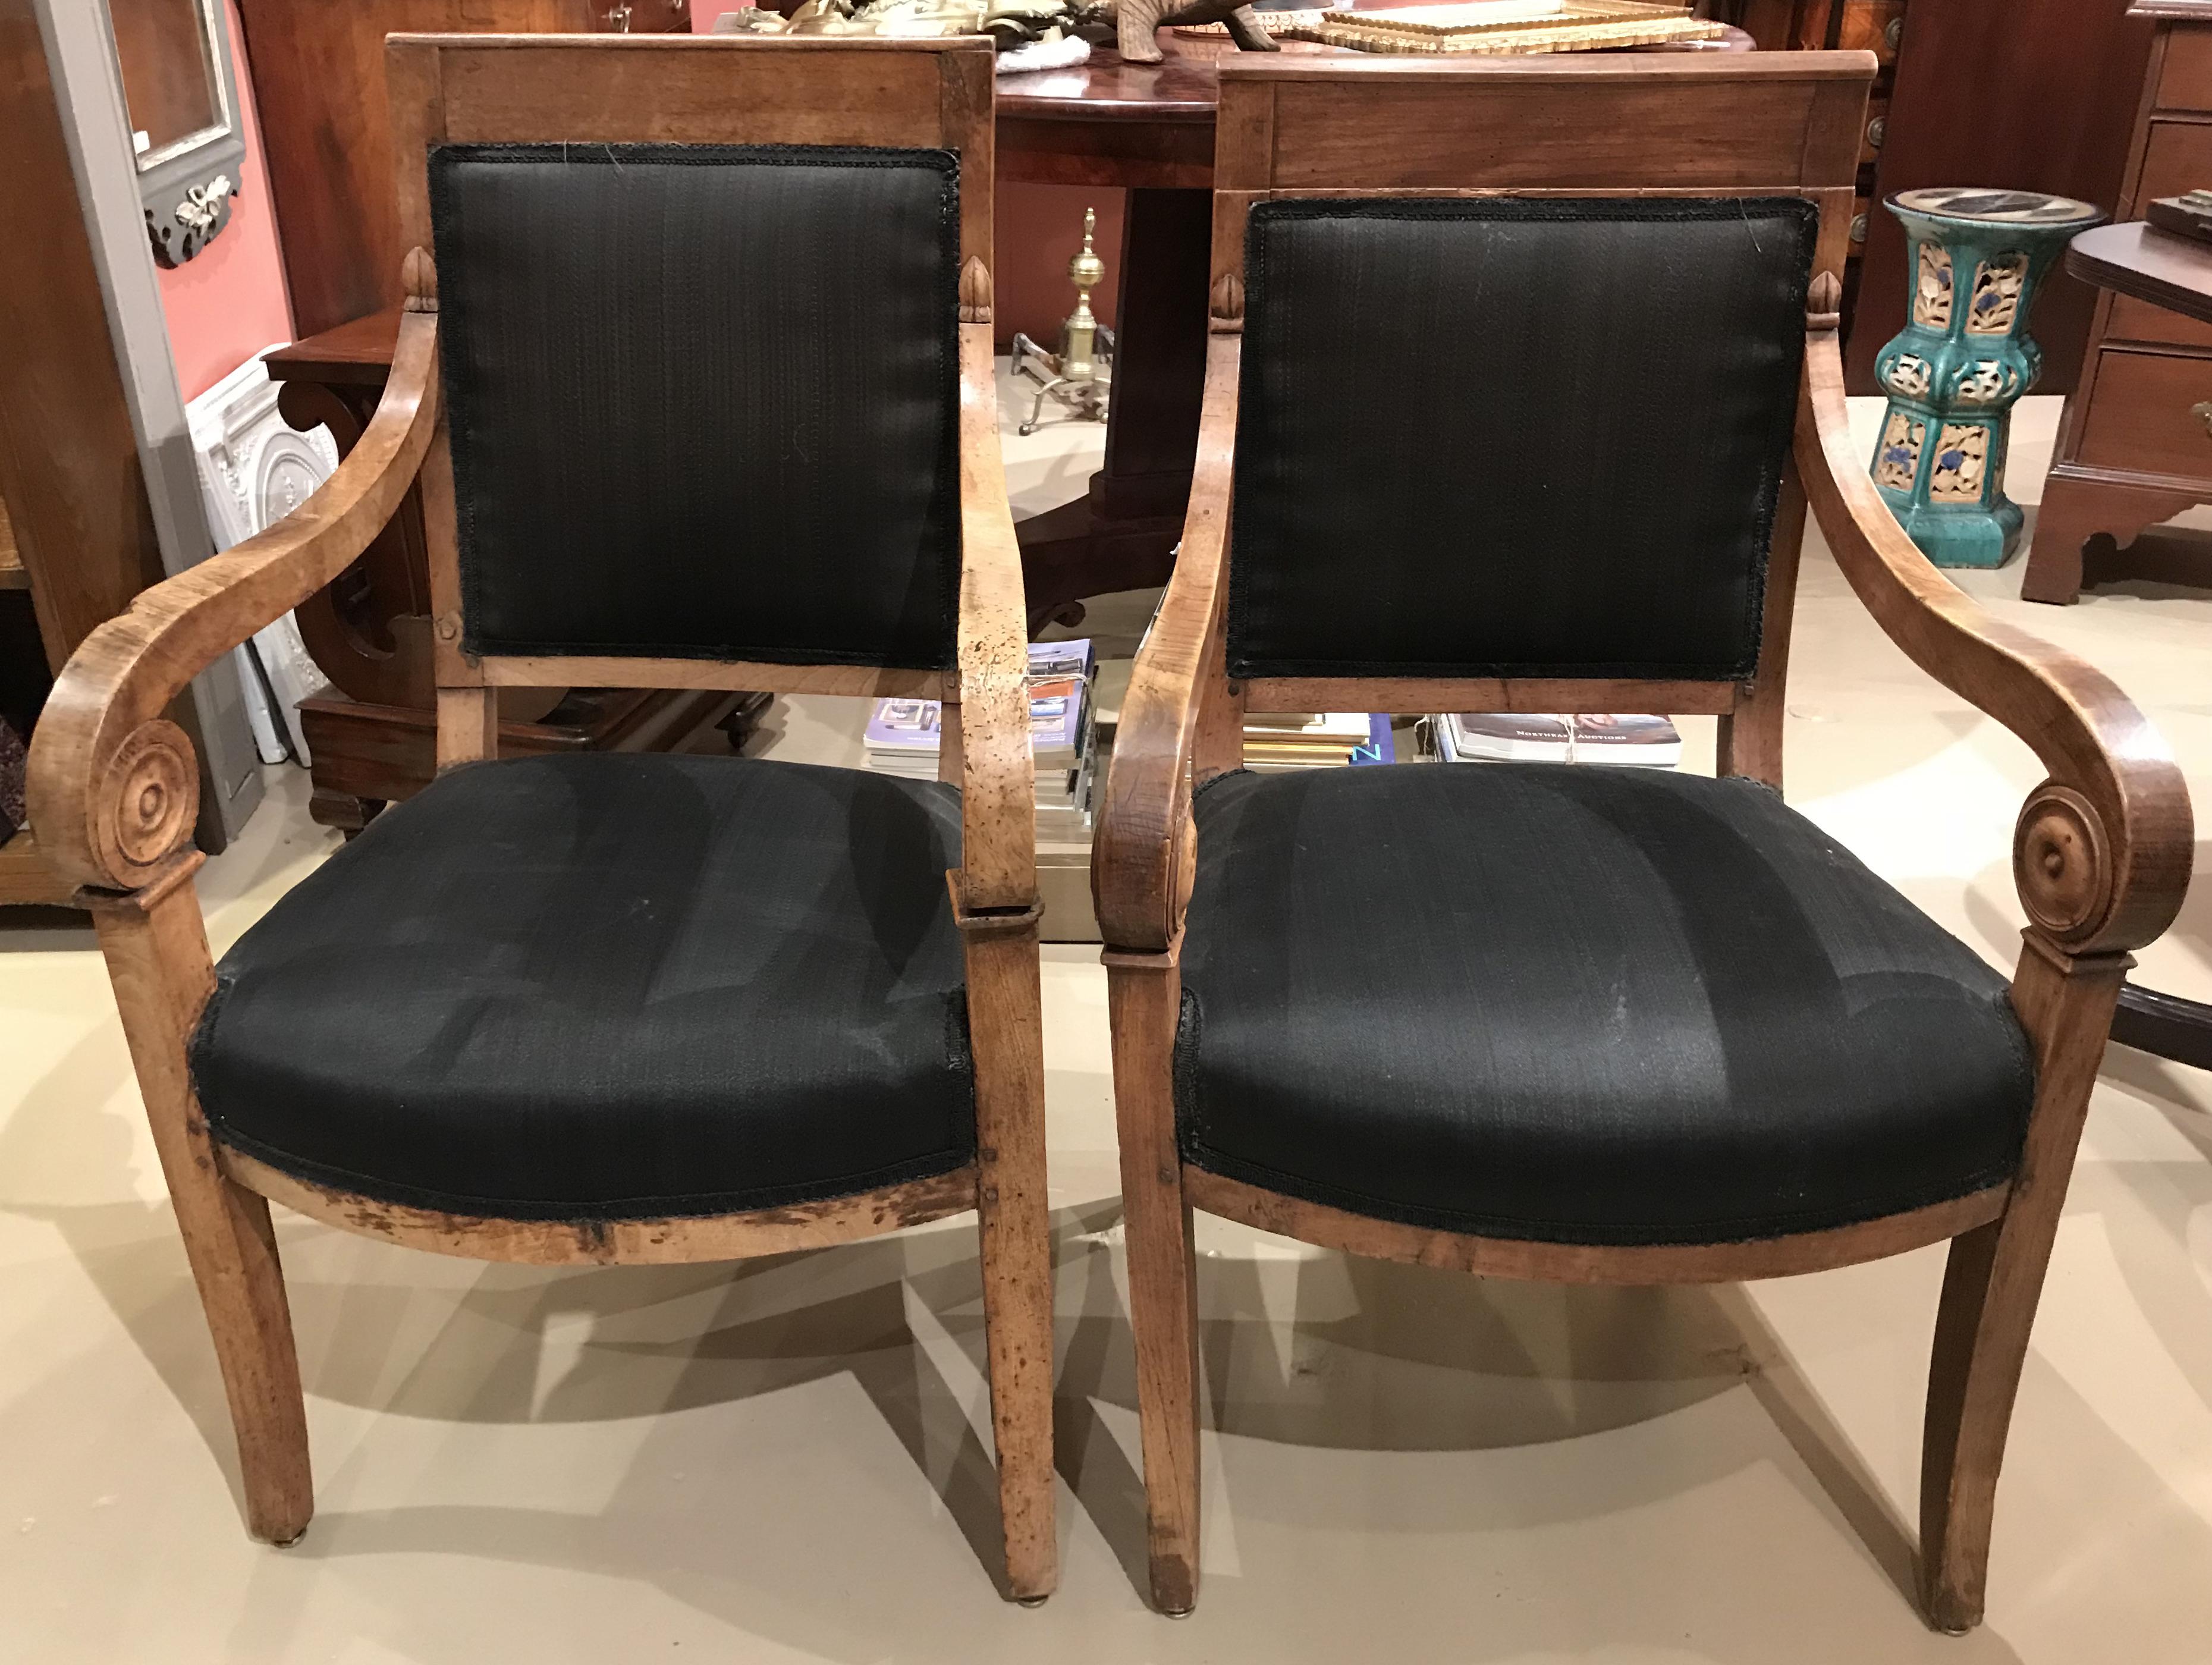 A fine near pair of fruitwood Empire armchairs with scrolled arms. Very good condition, with fresher black upholstery, some minor worm damage, other edge imperfections and light overall wear from age and use. Dimensions: Left chair is slightly